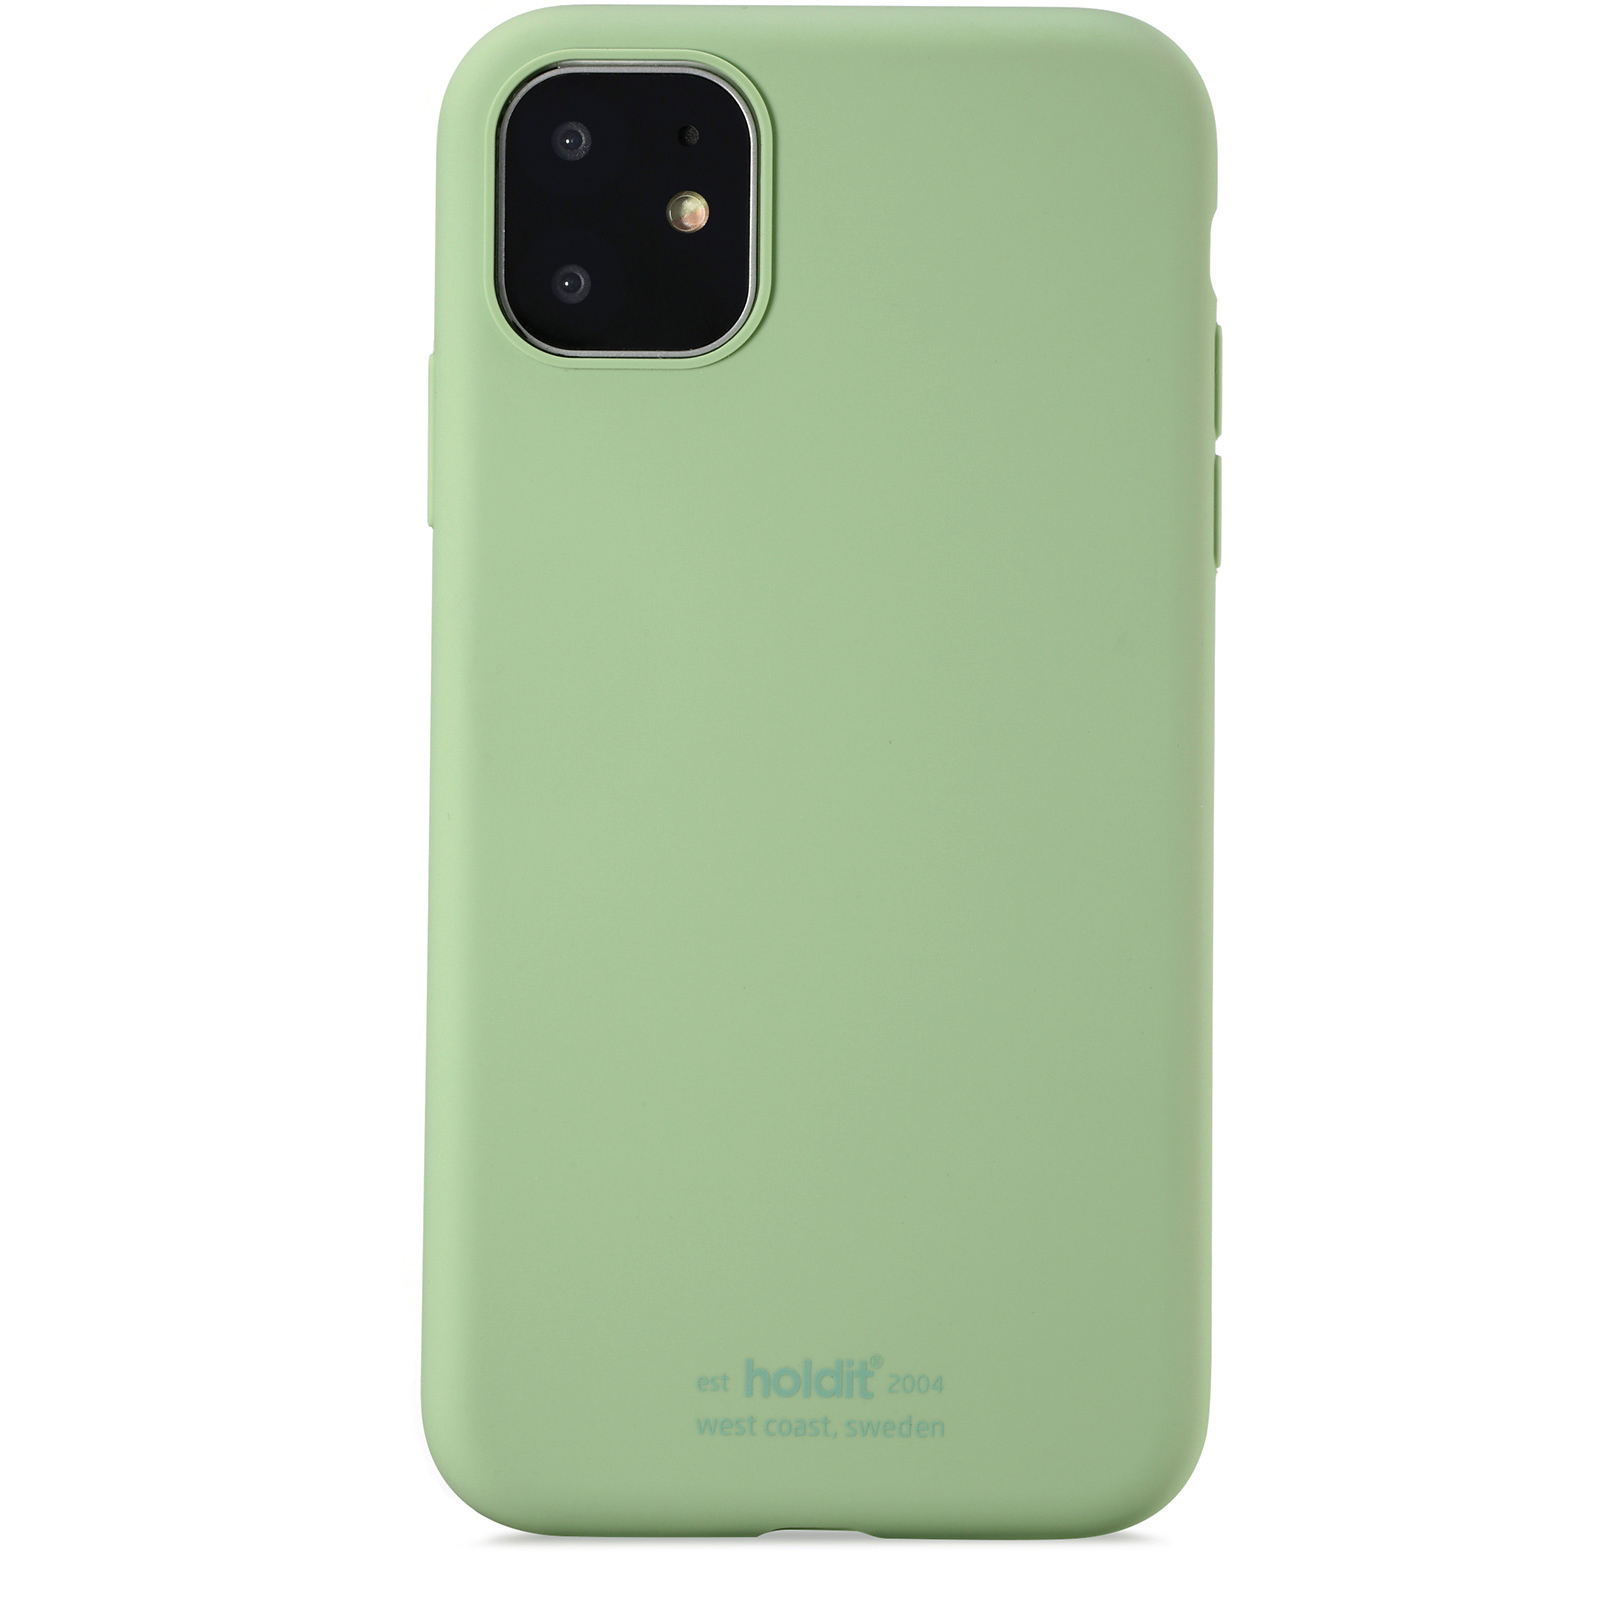 iPhone 11, case silicone, jade green